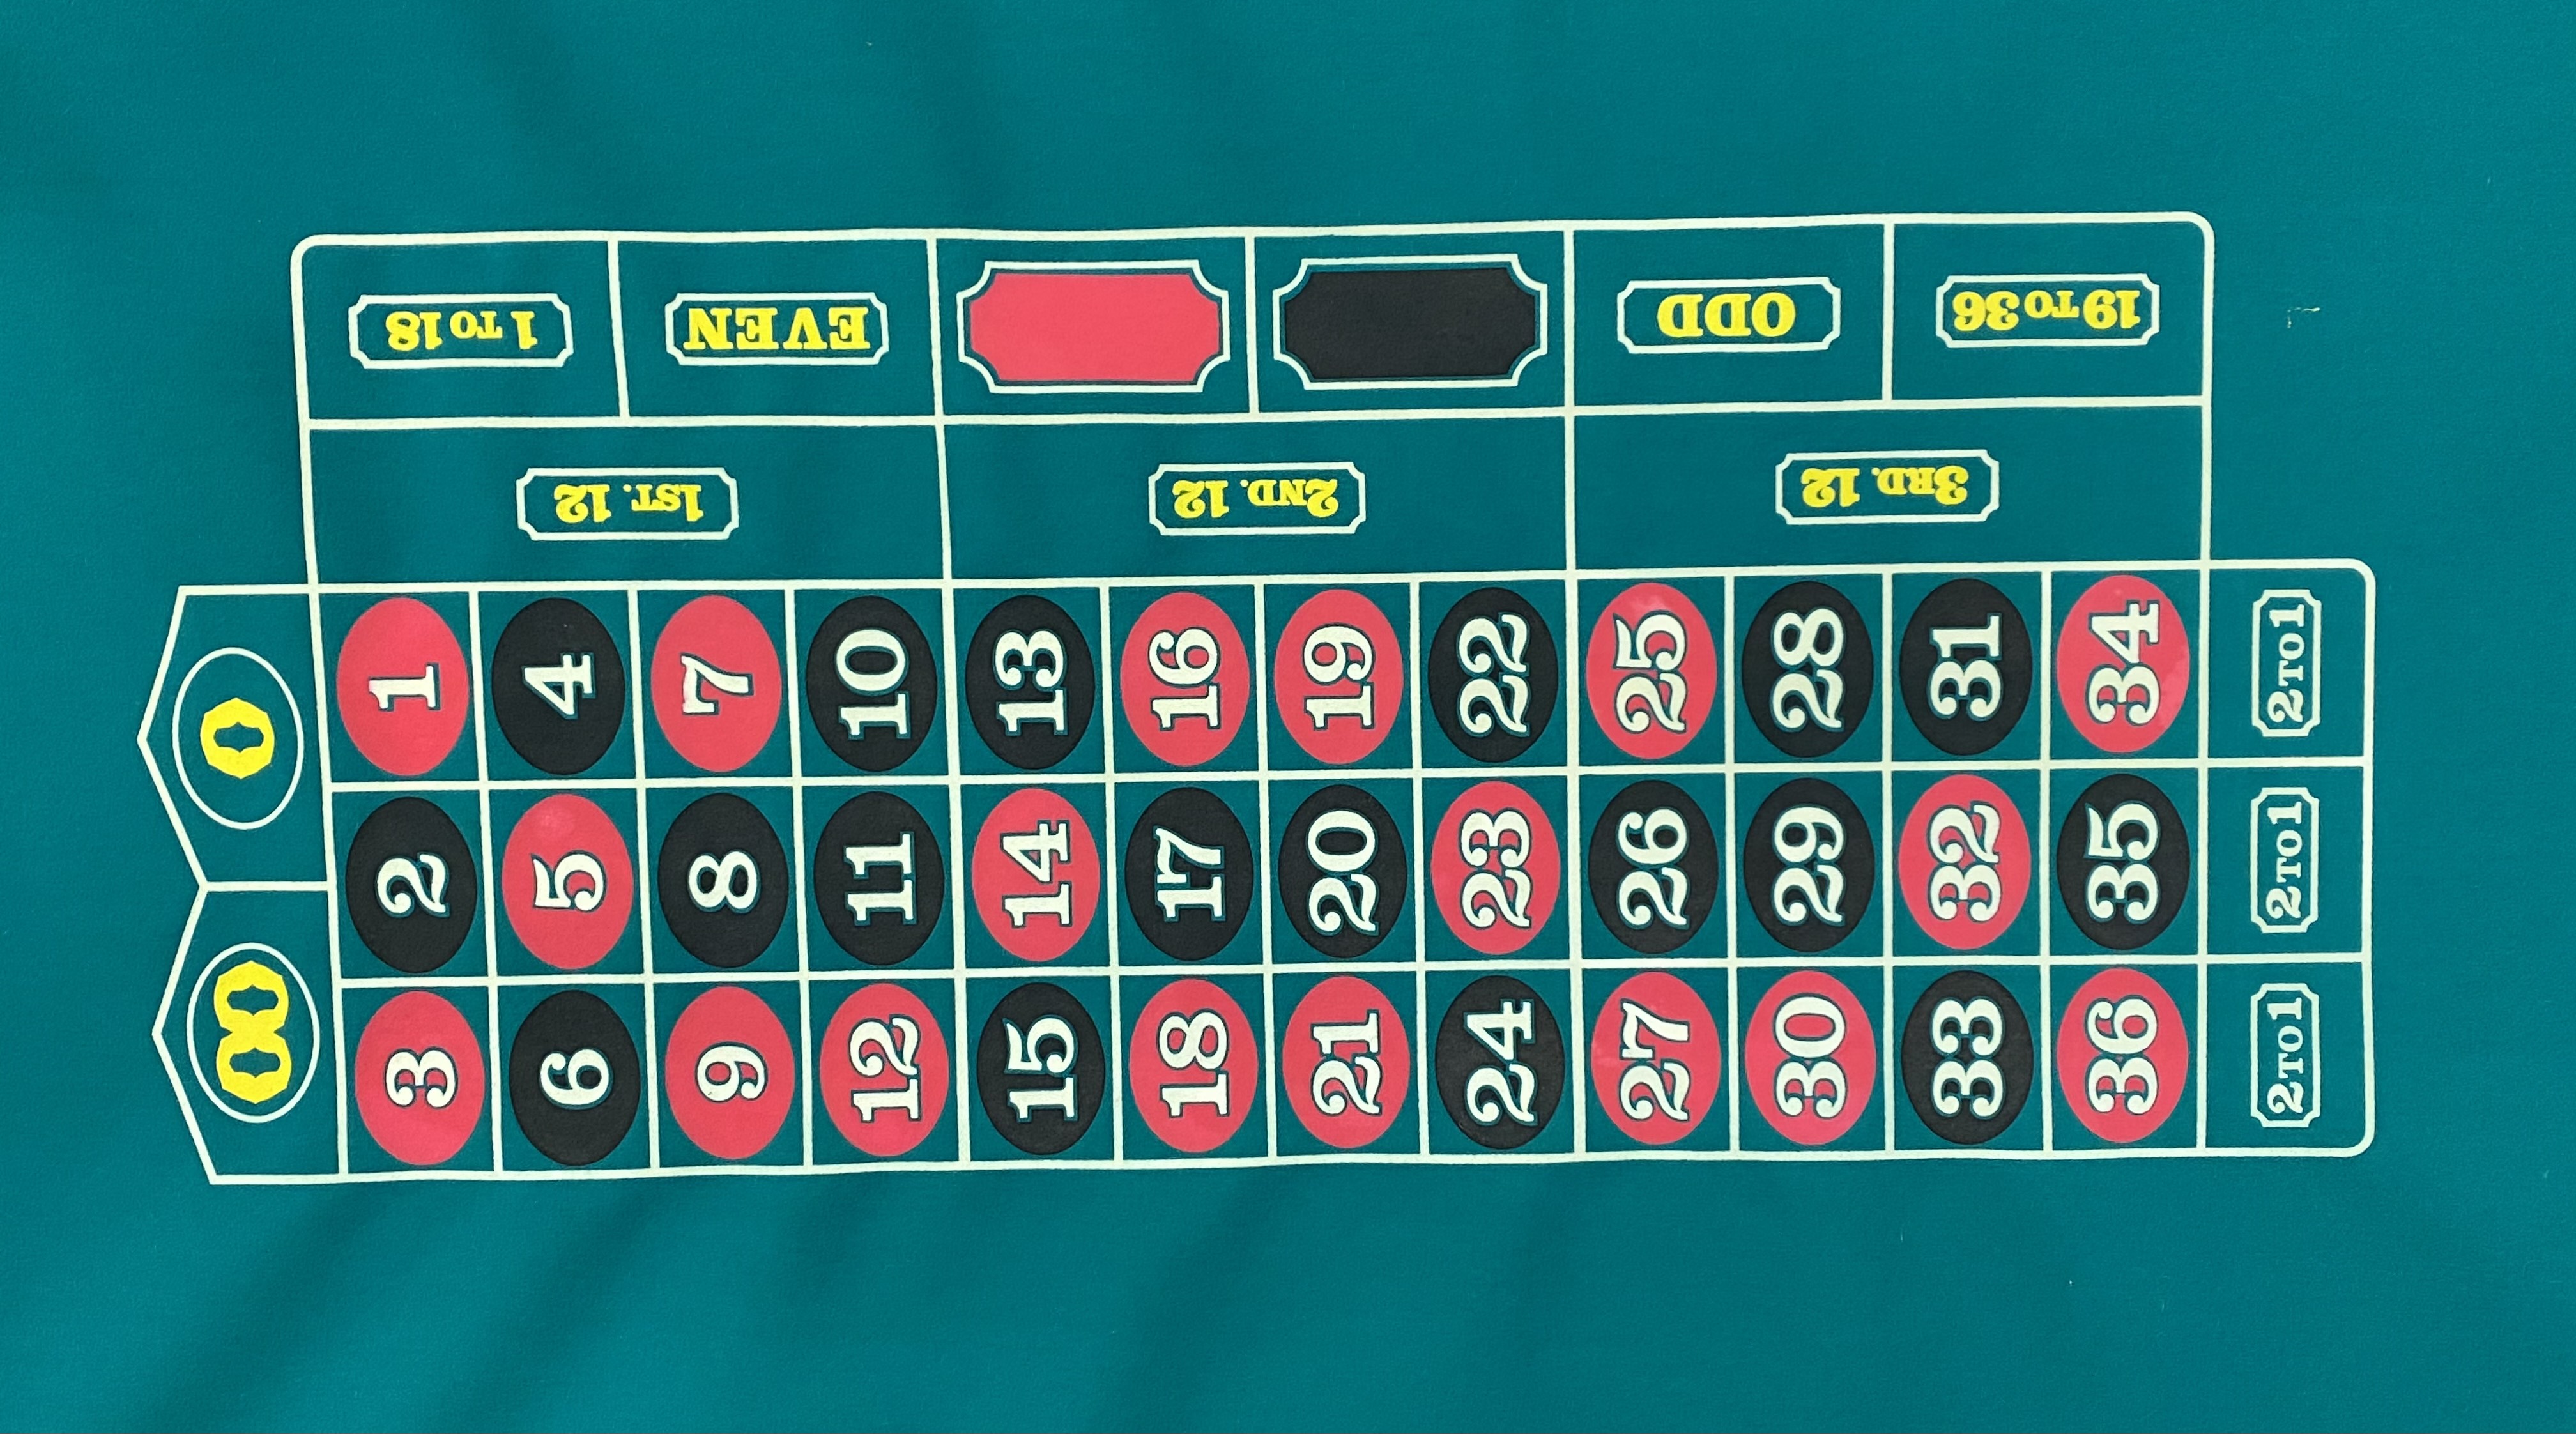 Roulette Layout Cloth 